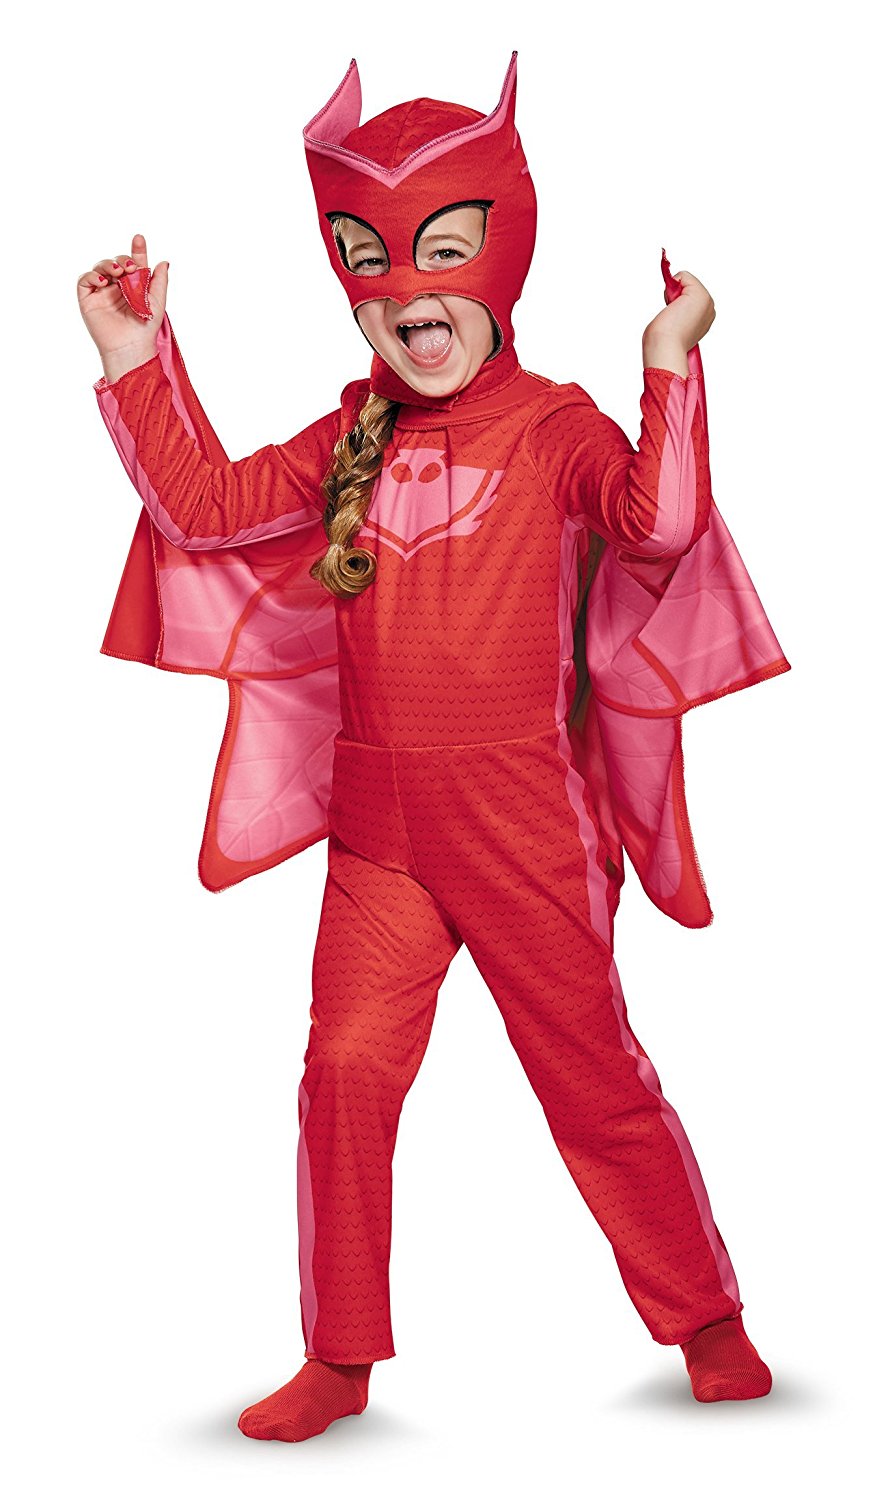 Owlette or Catboy PJ Masks Costume as low as $14.06! Was $29.99 ...